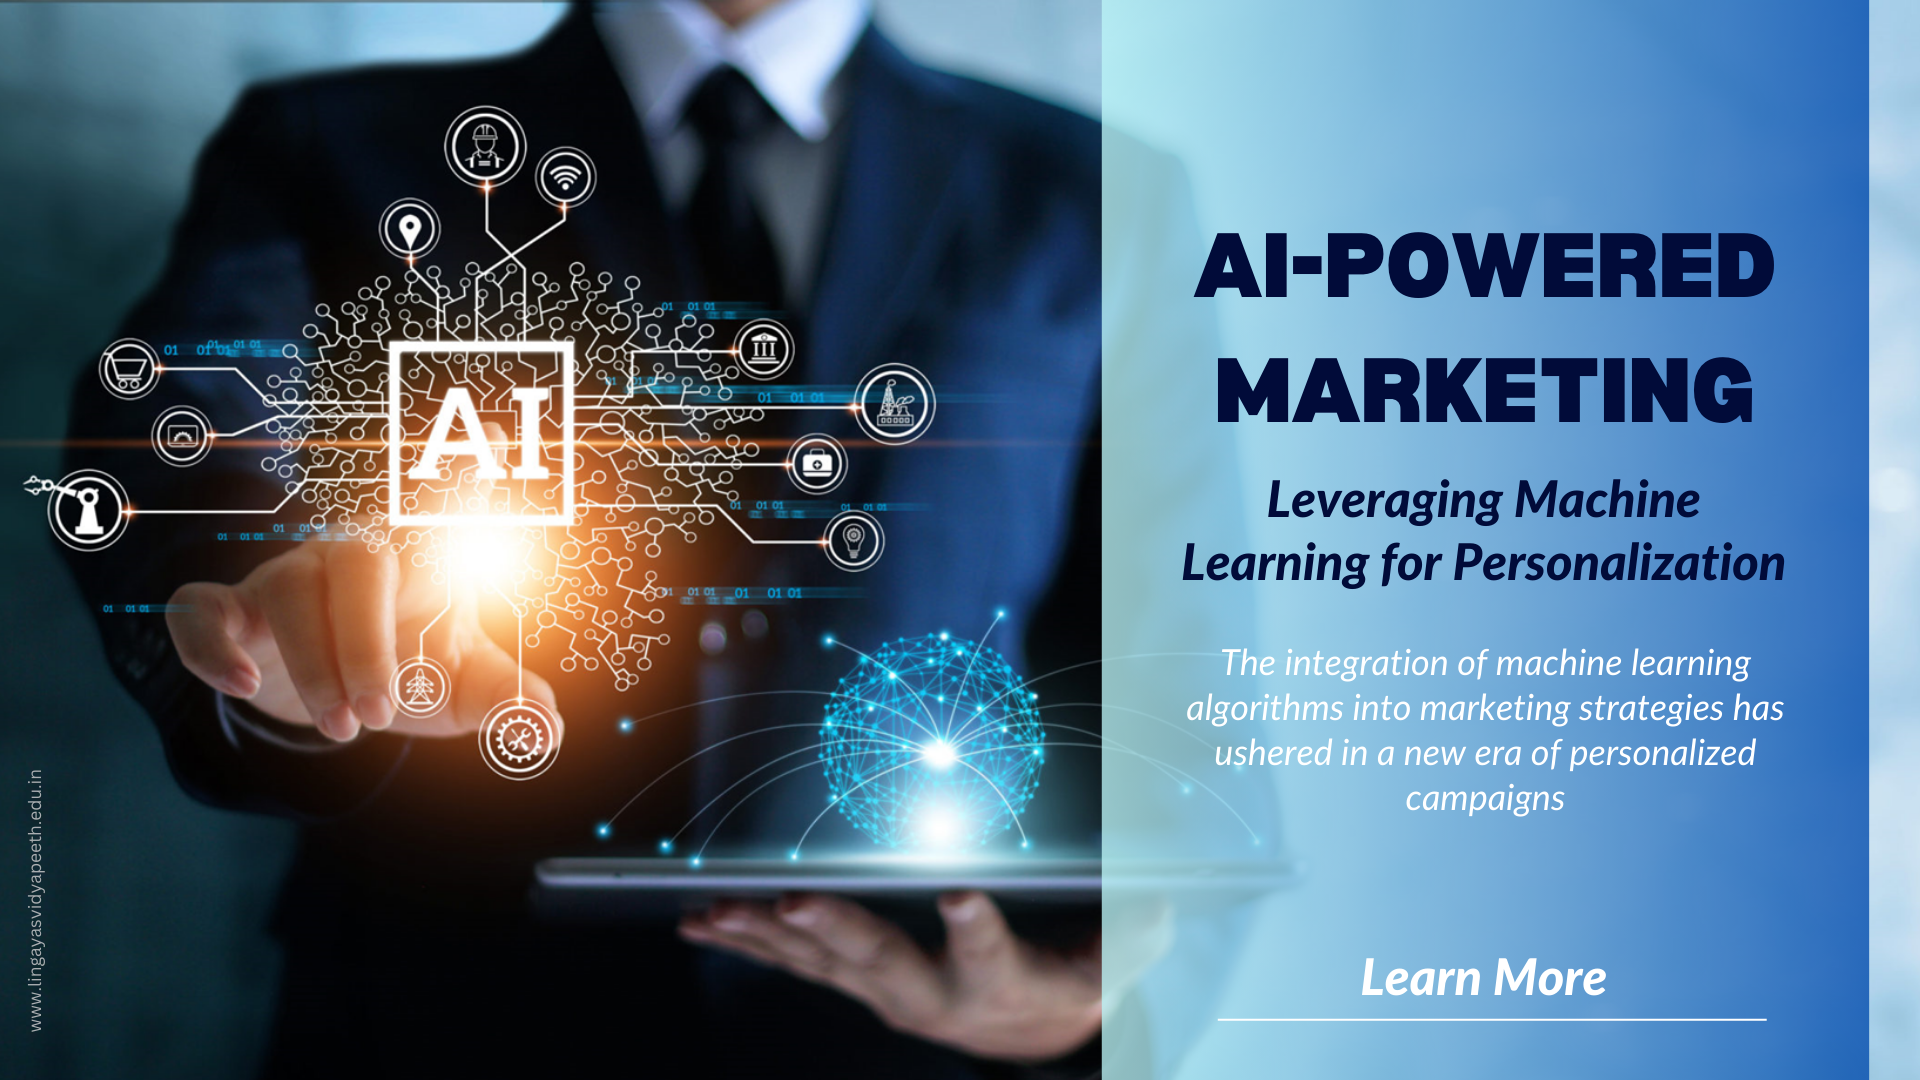 AI-Powered Marketing: Leveraging Machine Learning for Personalization